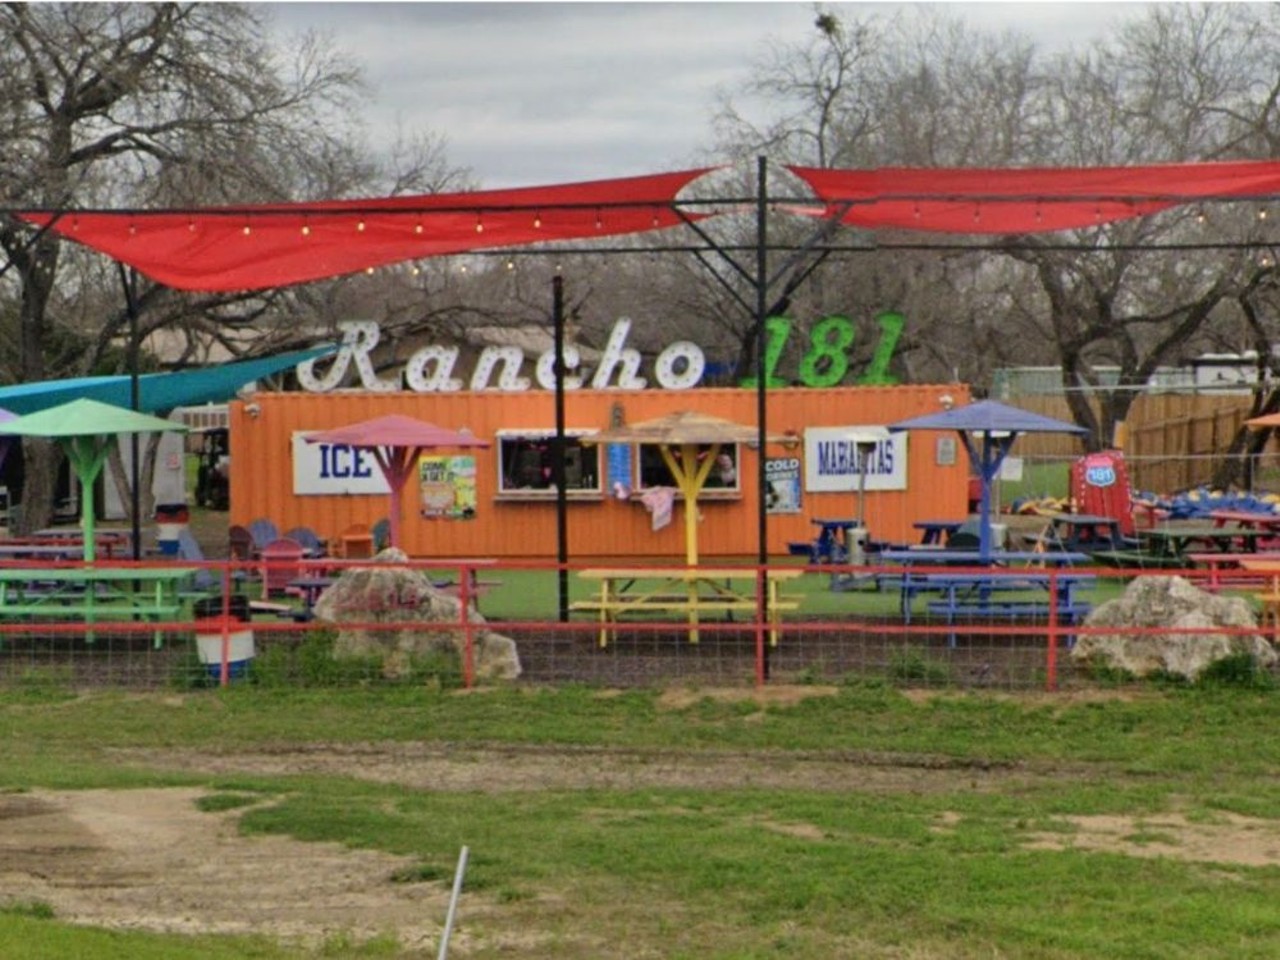 Rancho 181
13514 US-181 N., (210) 540-4839, facebook.com/Rancho181
Food truck park Rancho 181 opened on the South Side in 2022. The spot offers live music, yard games, and separate play areas for kids and canines.